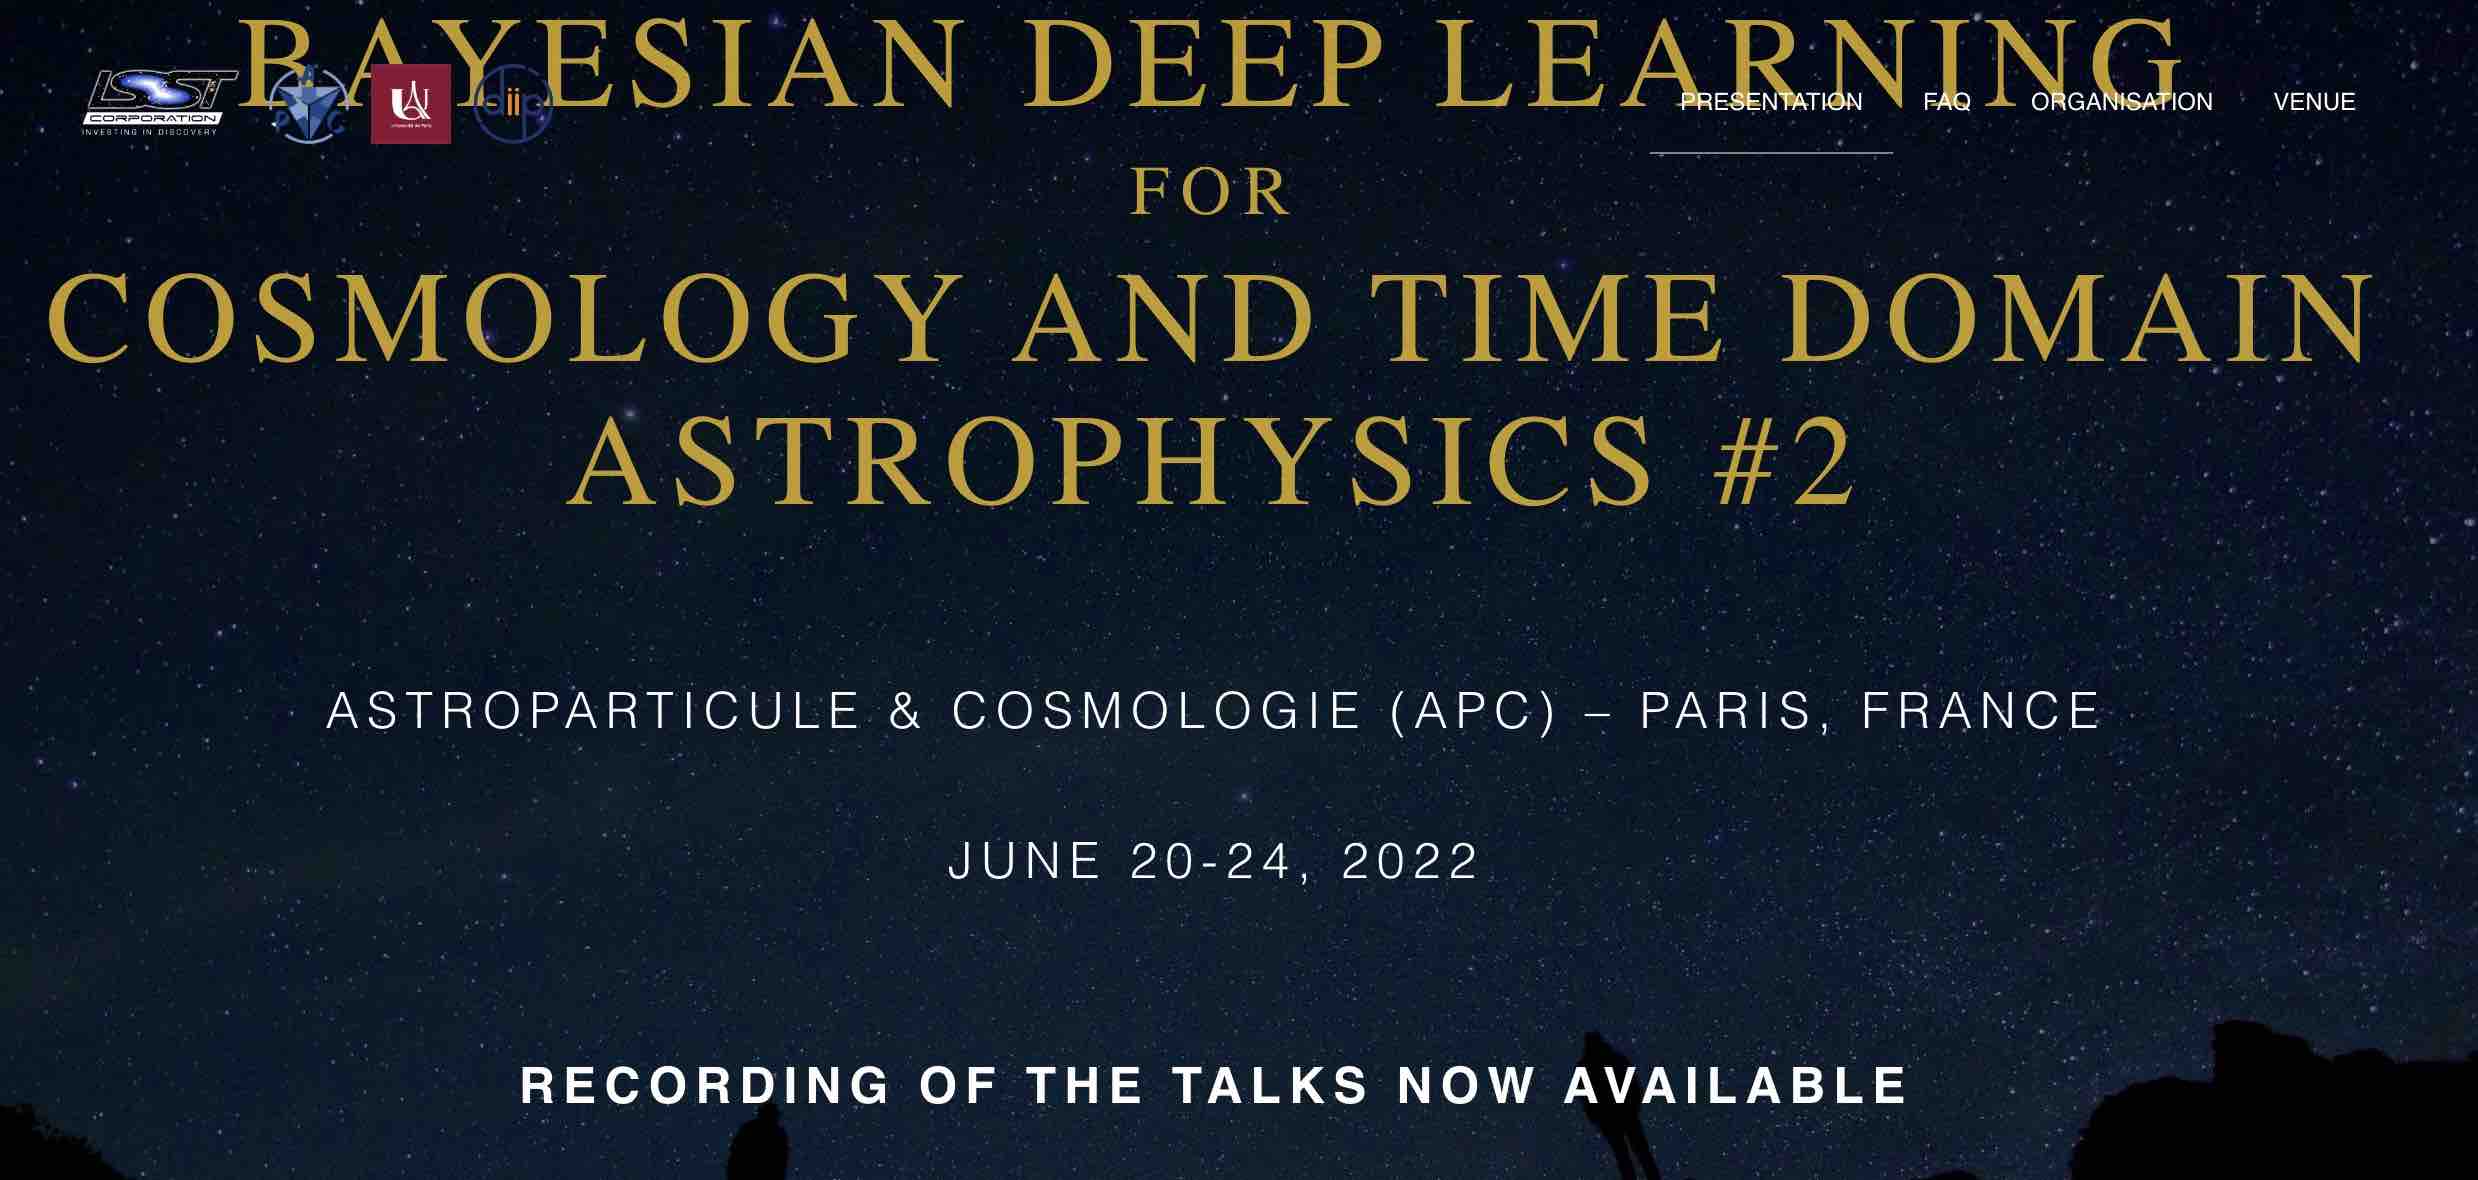 Bayesian Deep Learning for Cosmology and Time Domain Astrophysics #2